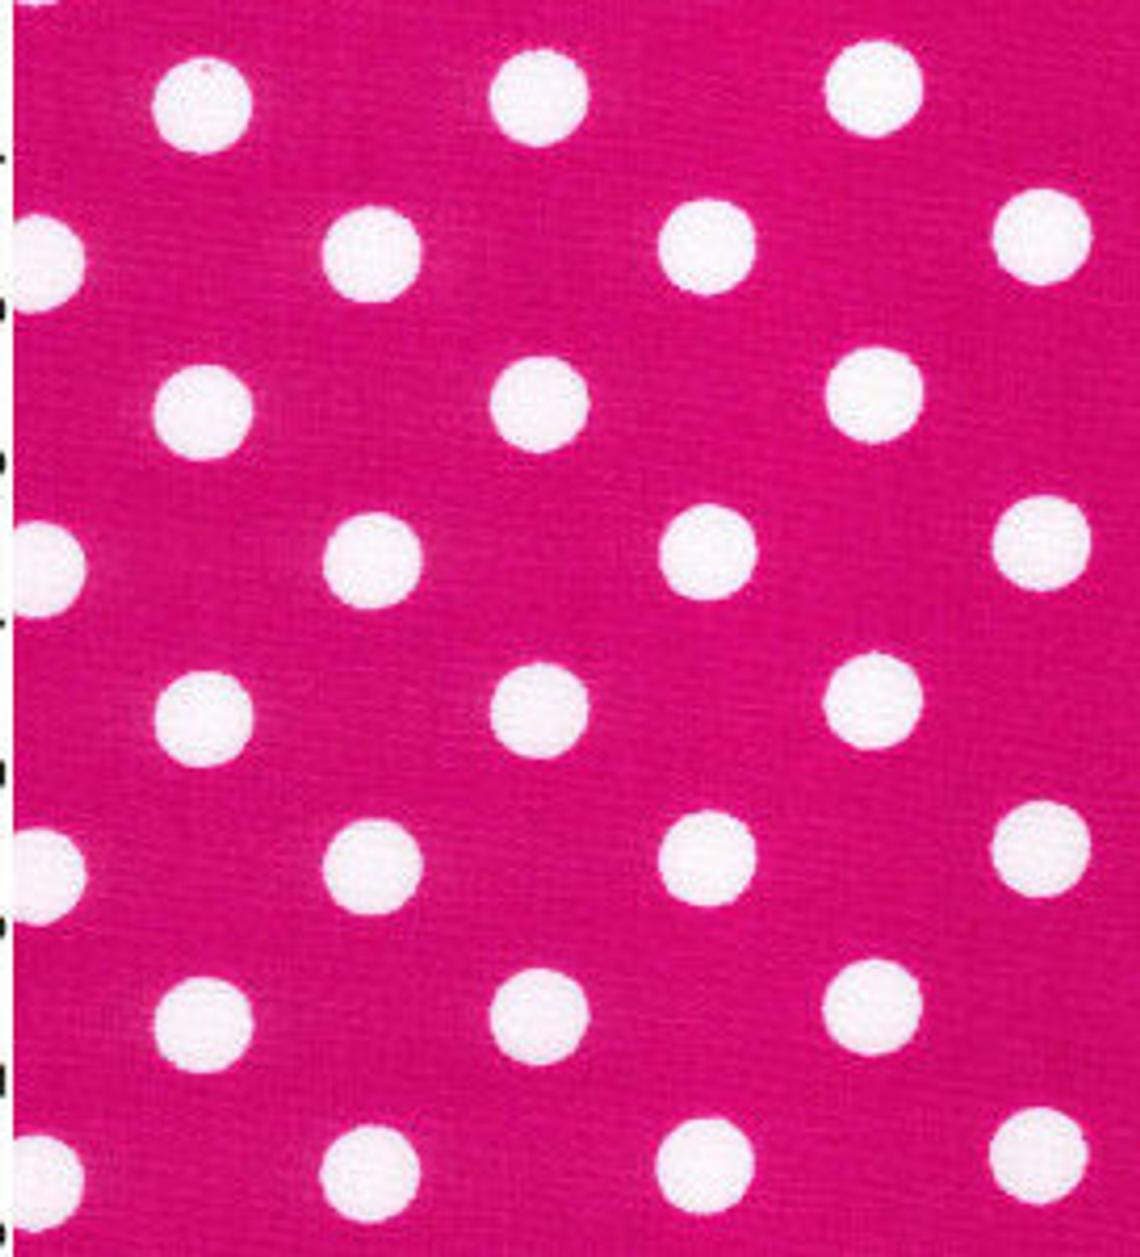 Excellent Quality Cerise 22mm Large Spotty Polka Dot 100% Cotton Poplin Fabric 130gsm Sewing Quilting Craft Home Decor